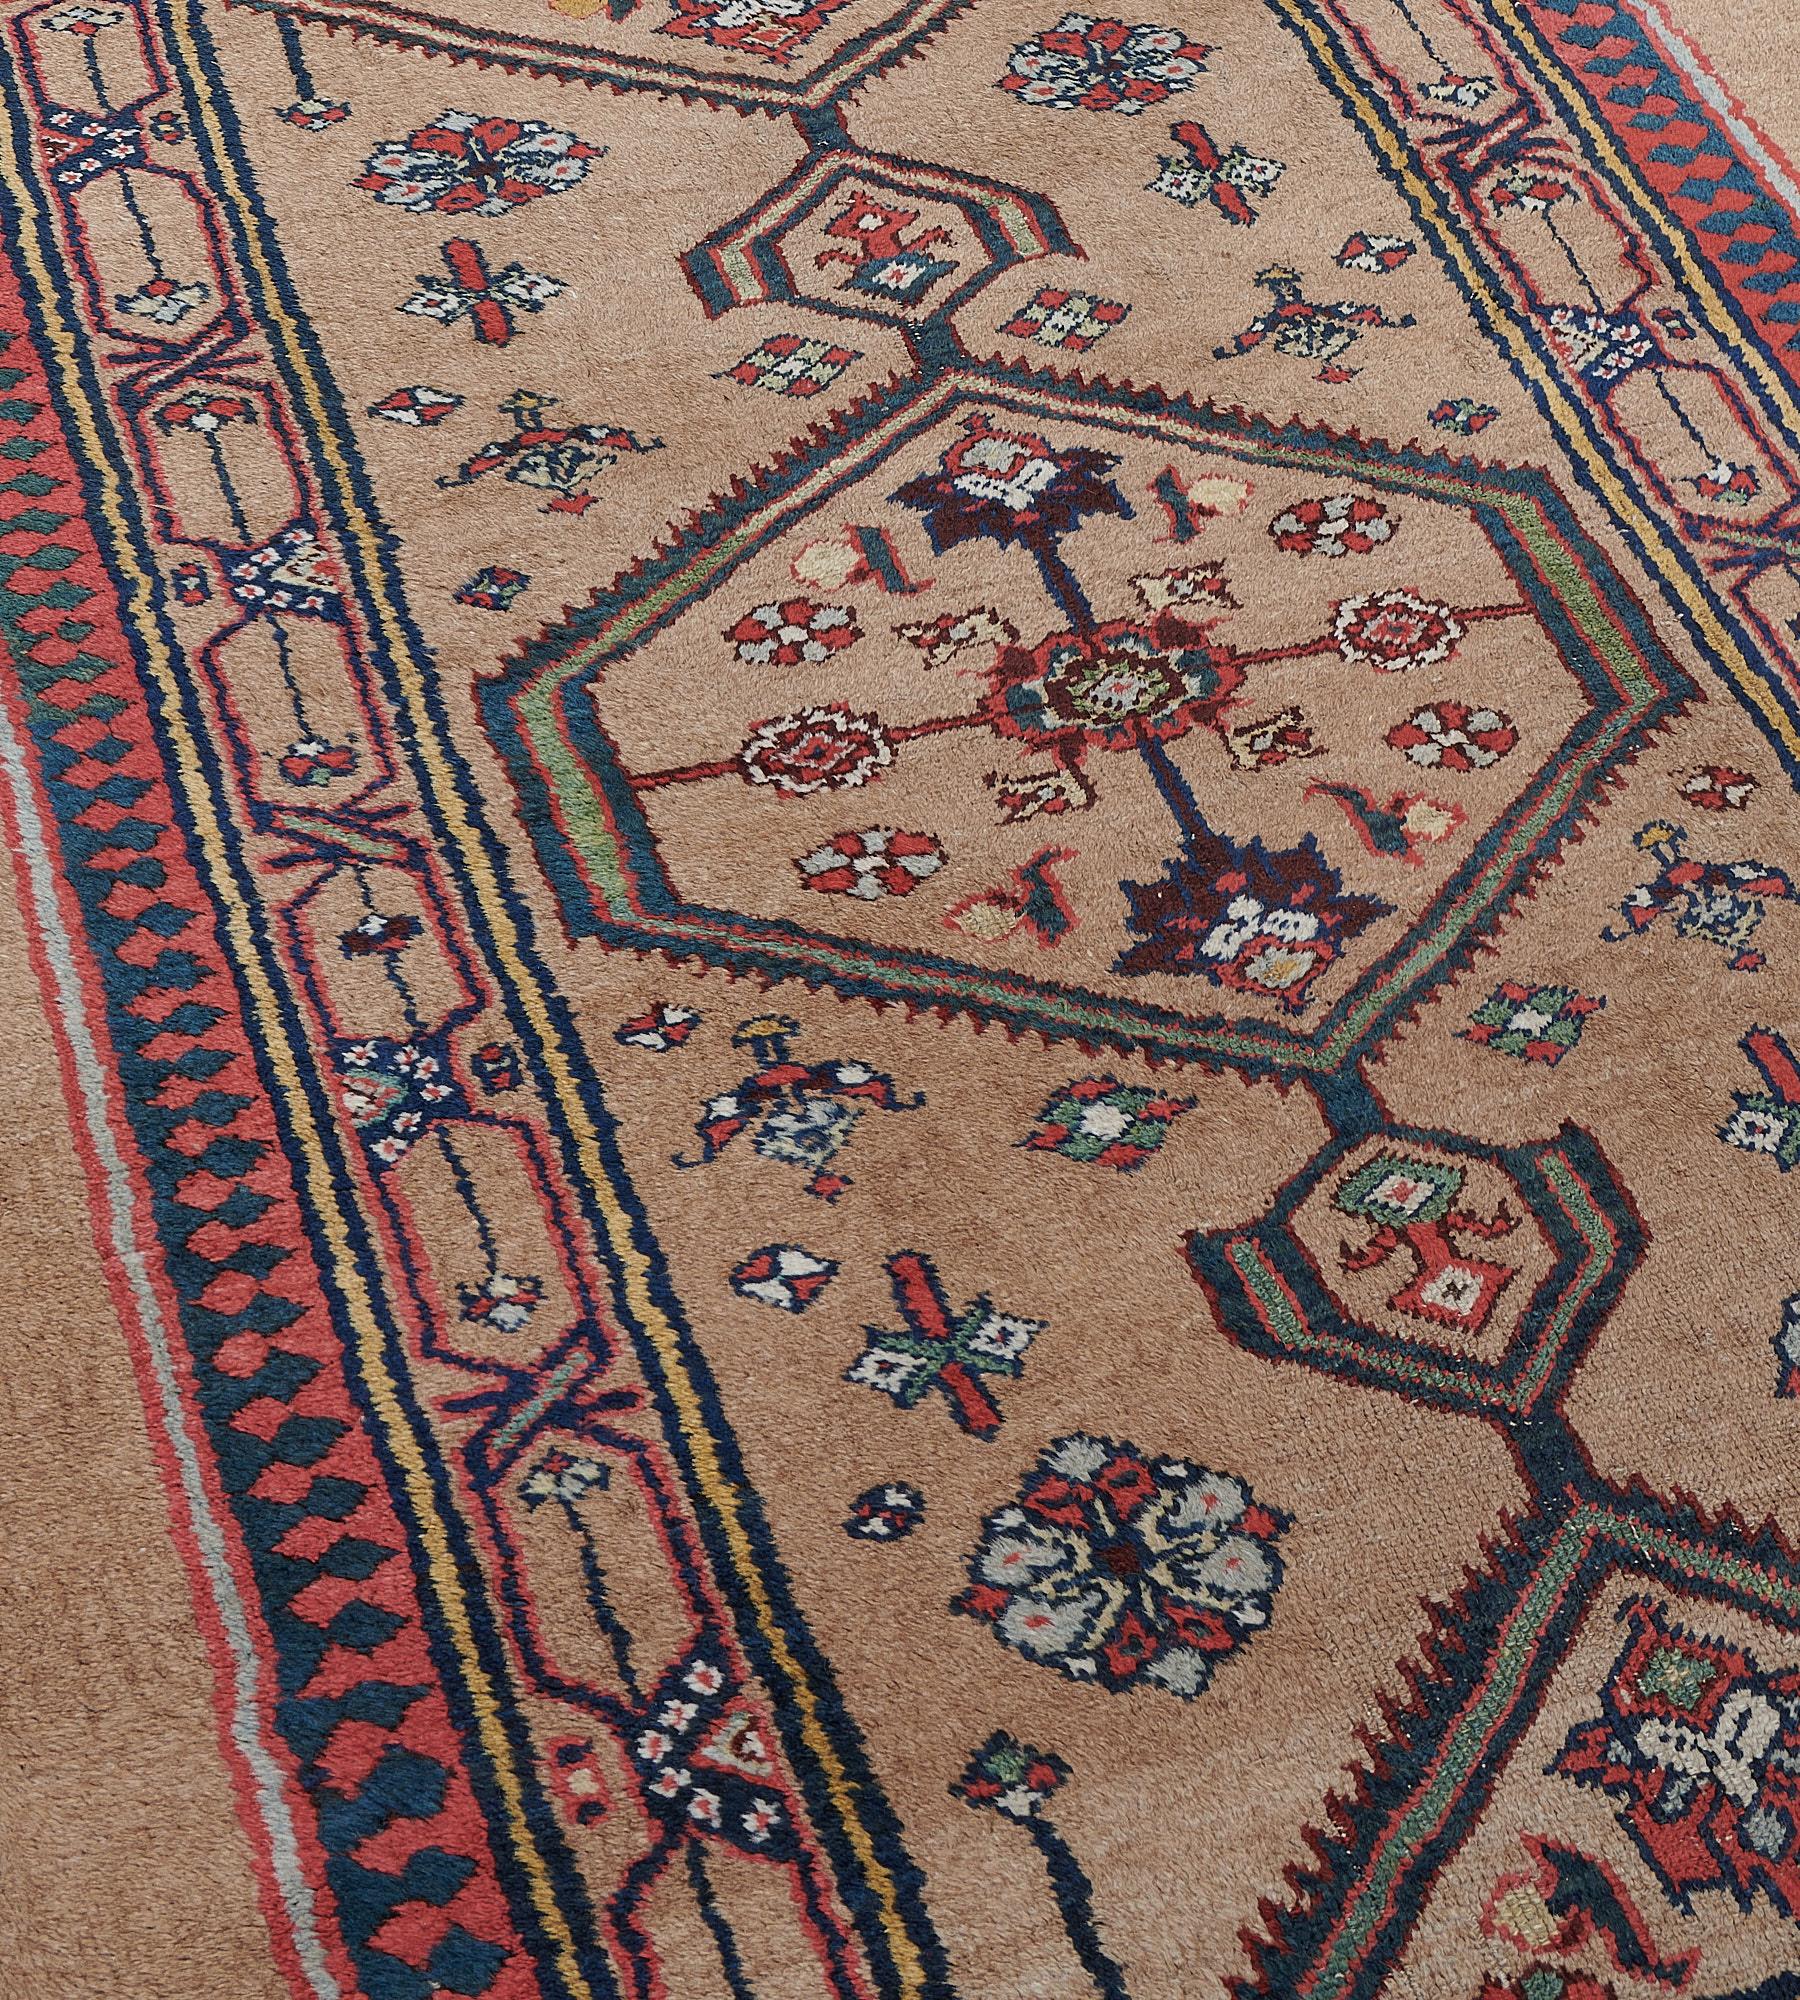 This antique, circa 1900, Serab runner has a camel-brown field with a central column of linked open serrated edged lozenges each containing a central rosette issuing angular floral motifs surrounded by polychrome floral motifs, in a camel-brown